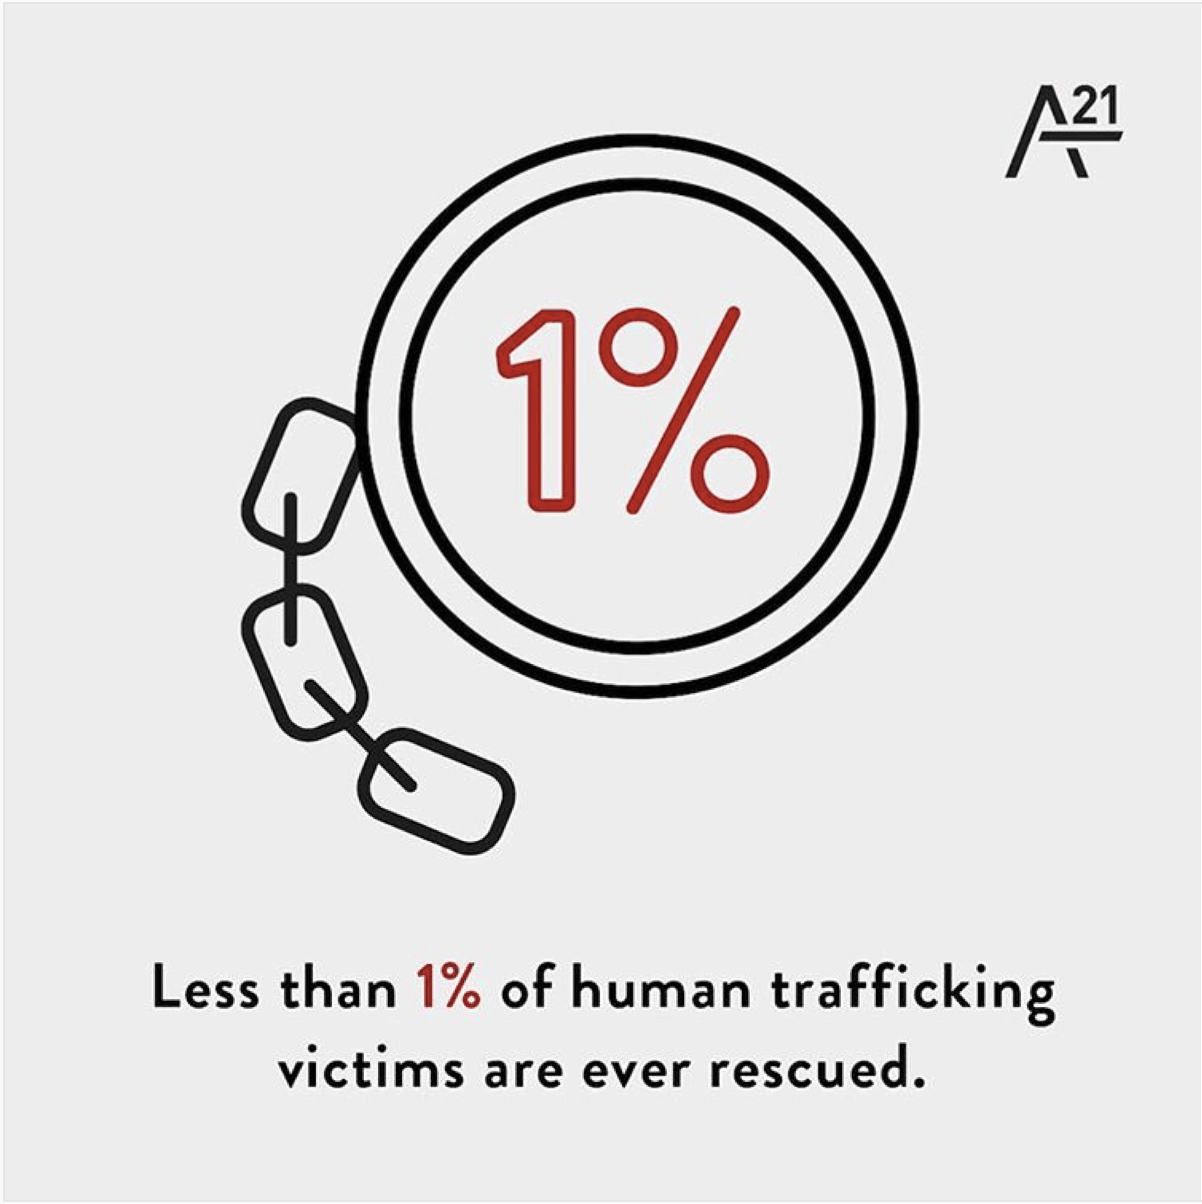 Less than 1% of human trafficking victims are ever rescued